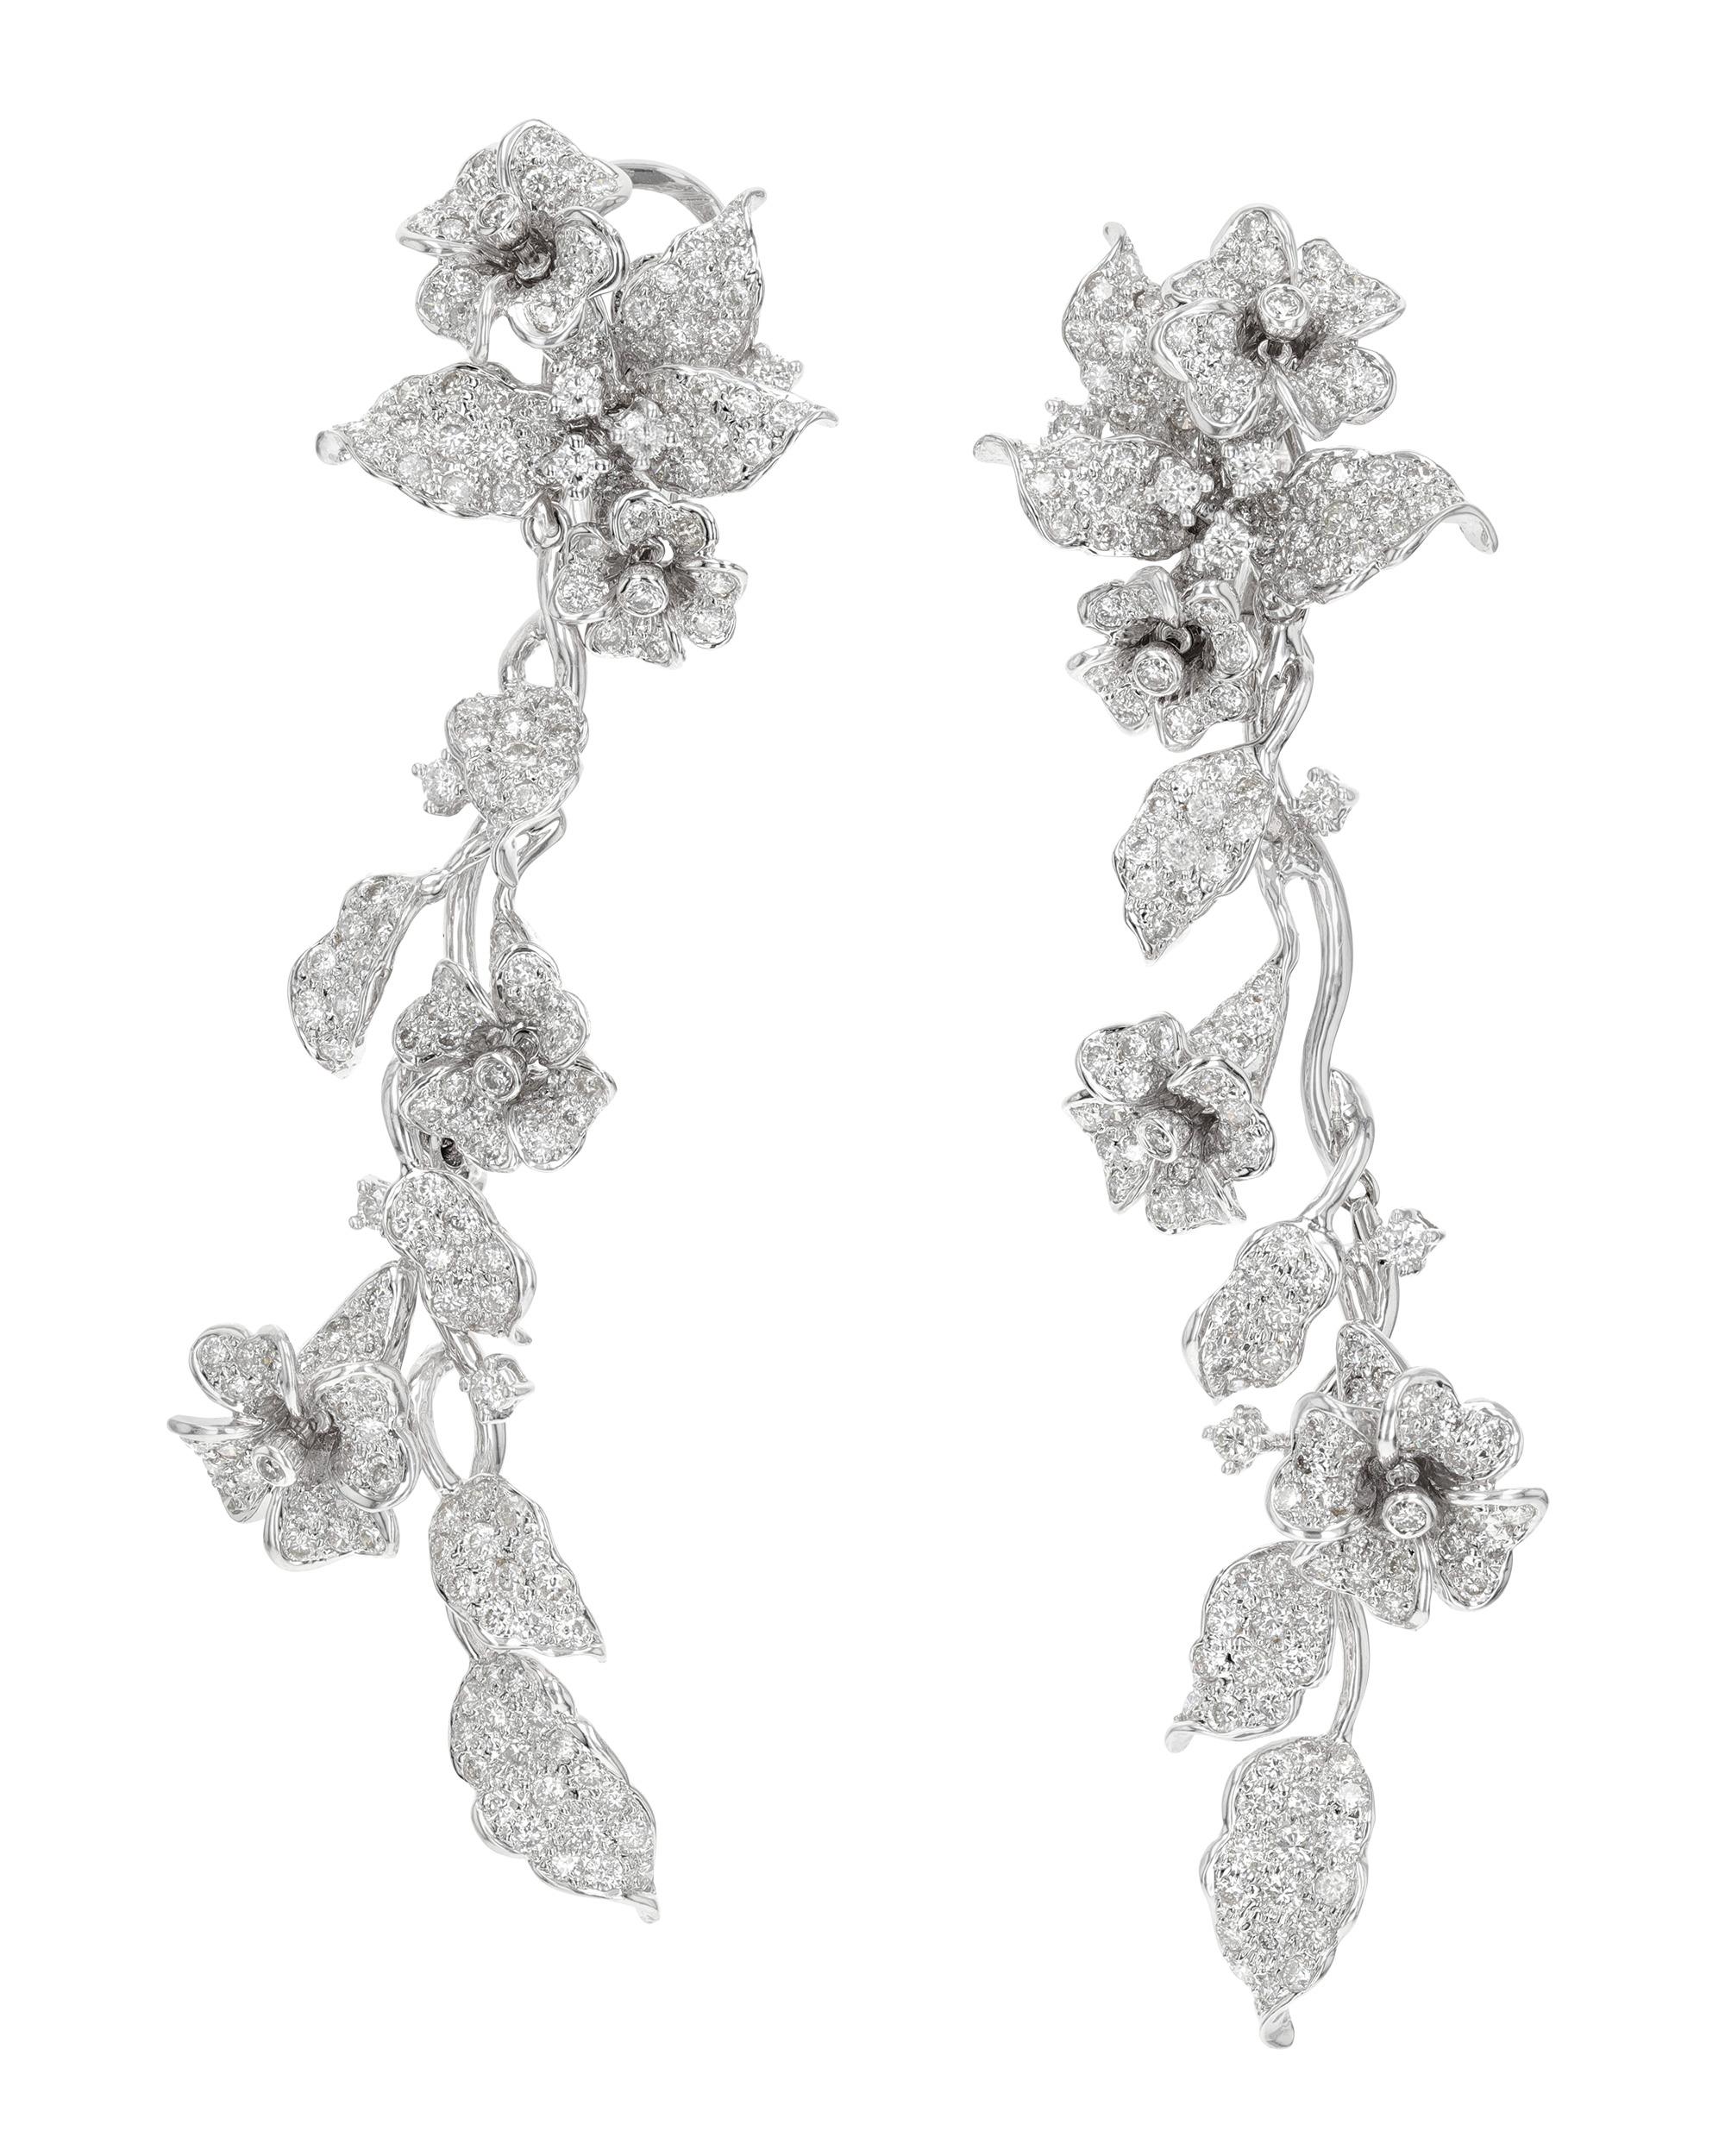 Round Cut Diamond Floral Convertible Earrings, 7.35 Carats